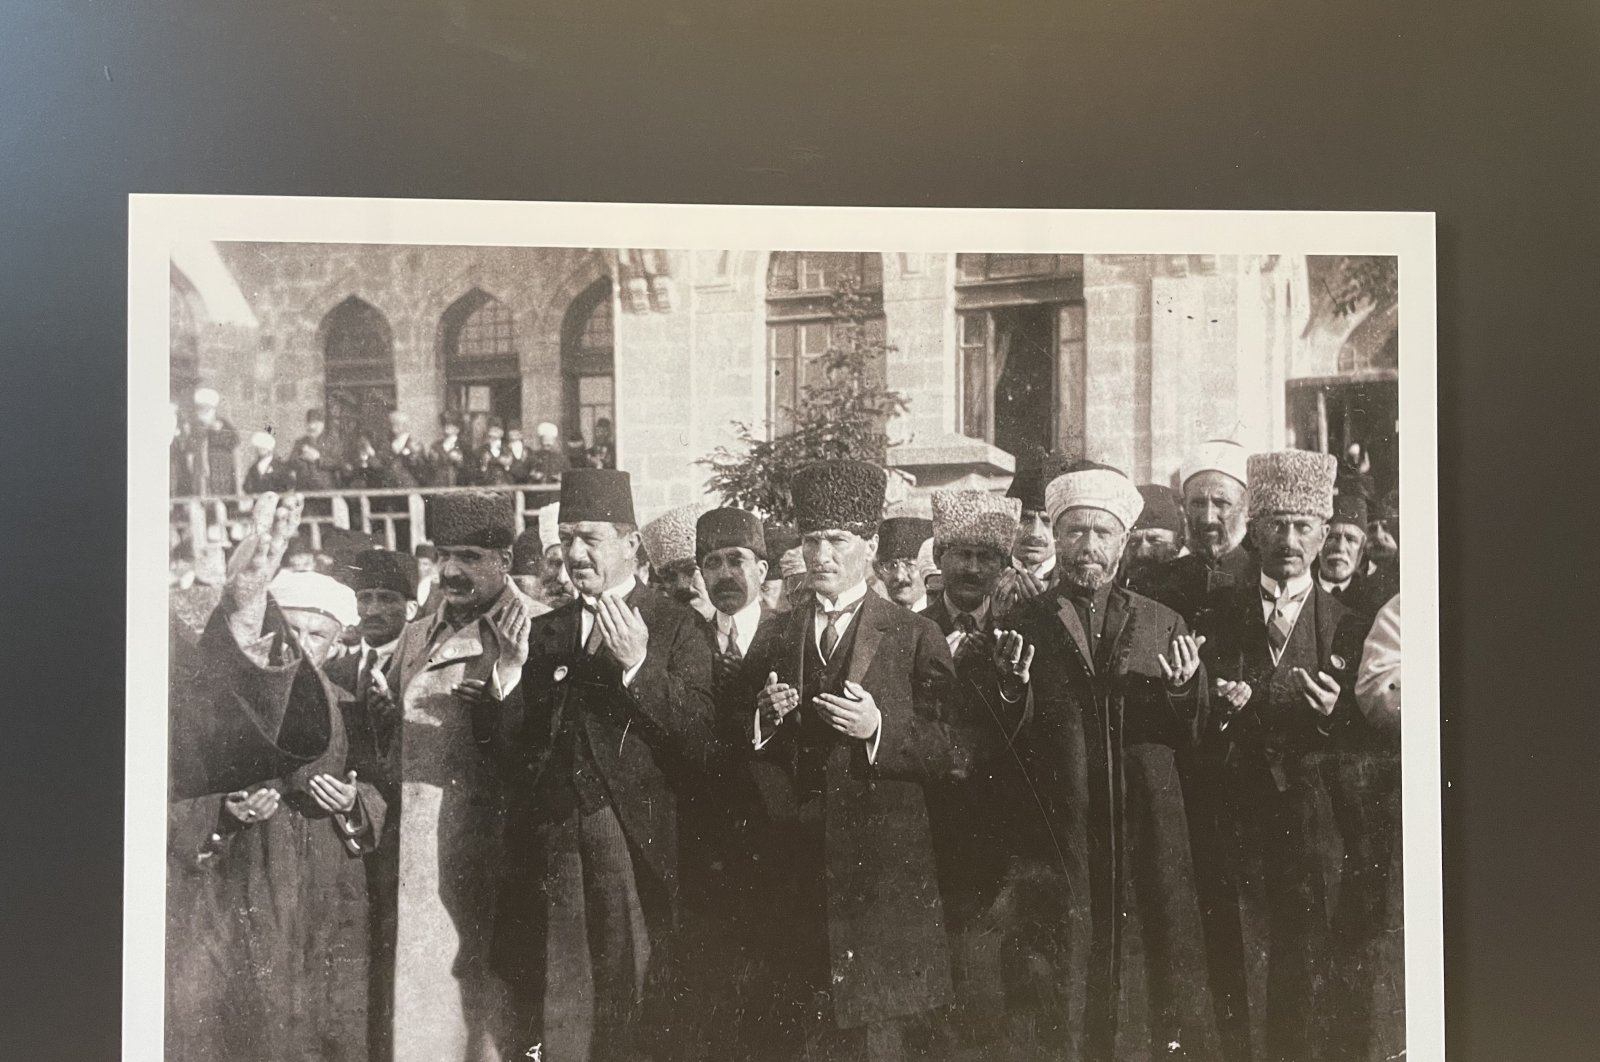 The photo shows the prayer made for the success of the Turkish armies, Mustafa Kemal Atatürk and the marshals, Istanbul, Türkiye, Oct. 27, 2023. (Photo by Buse Keskin)